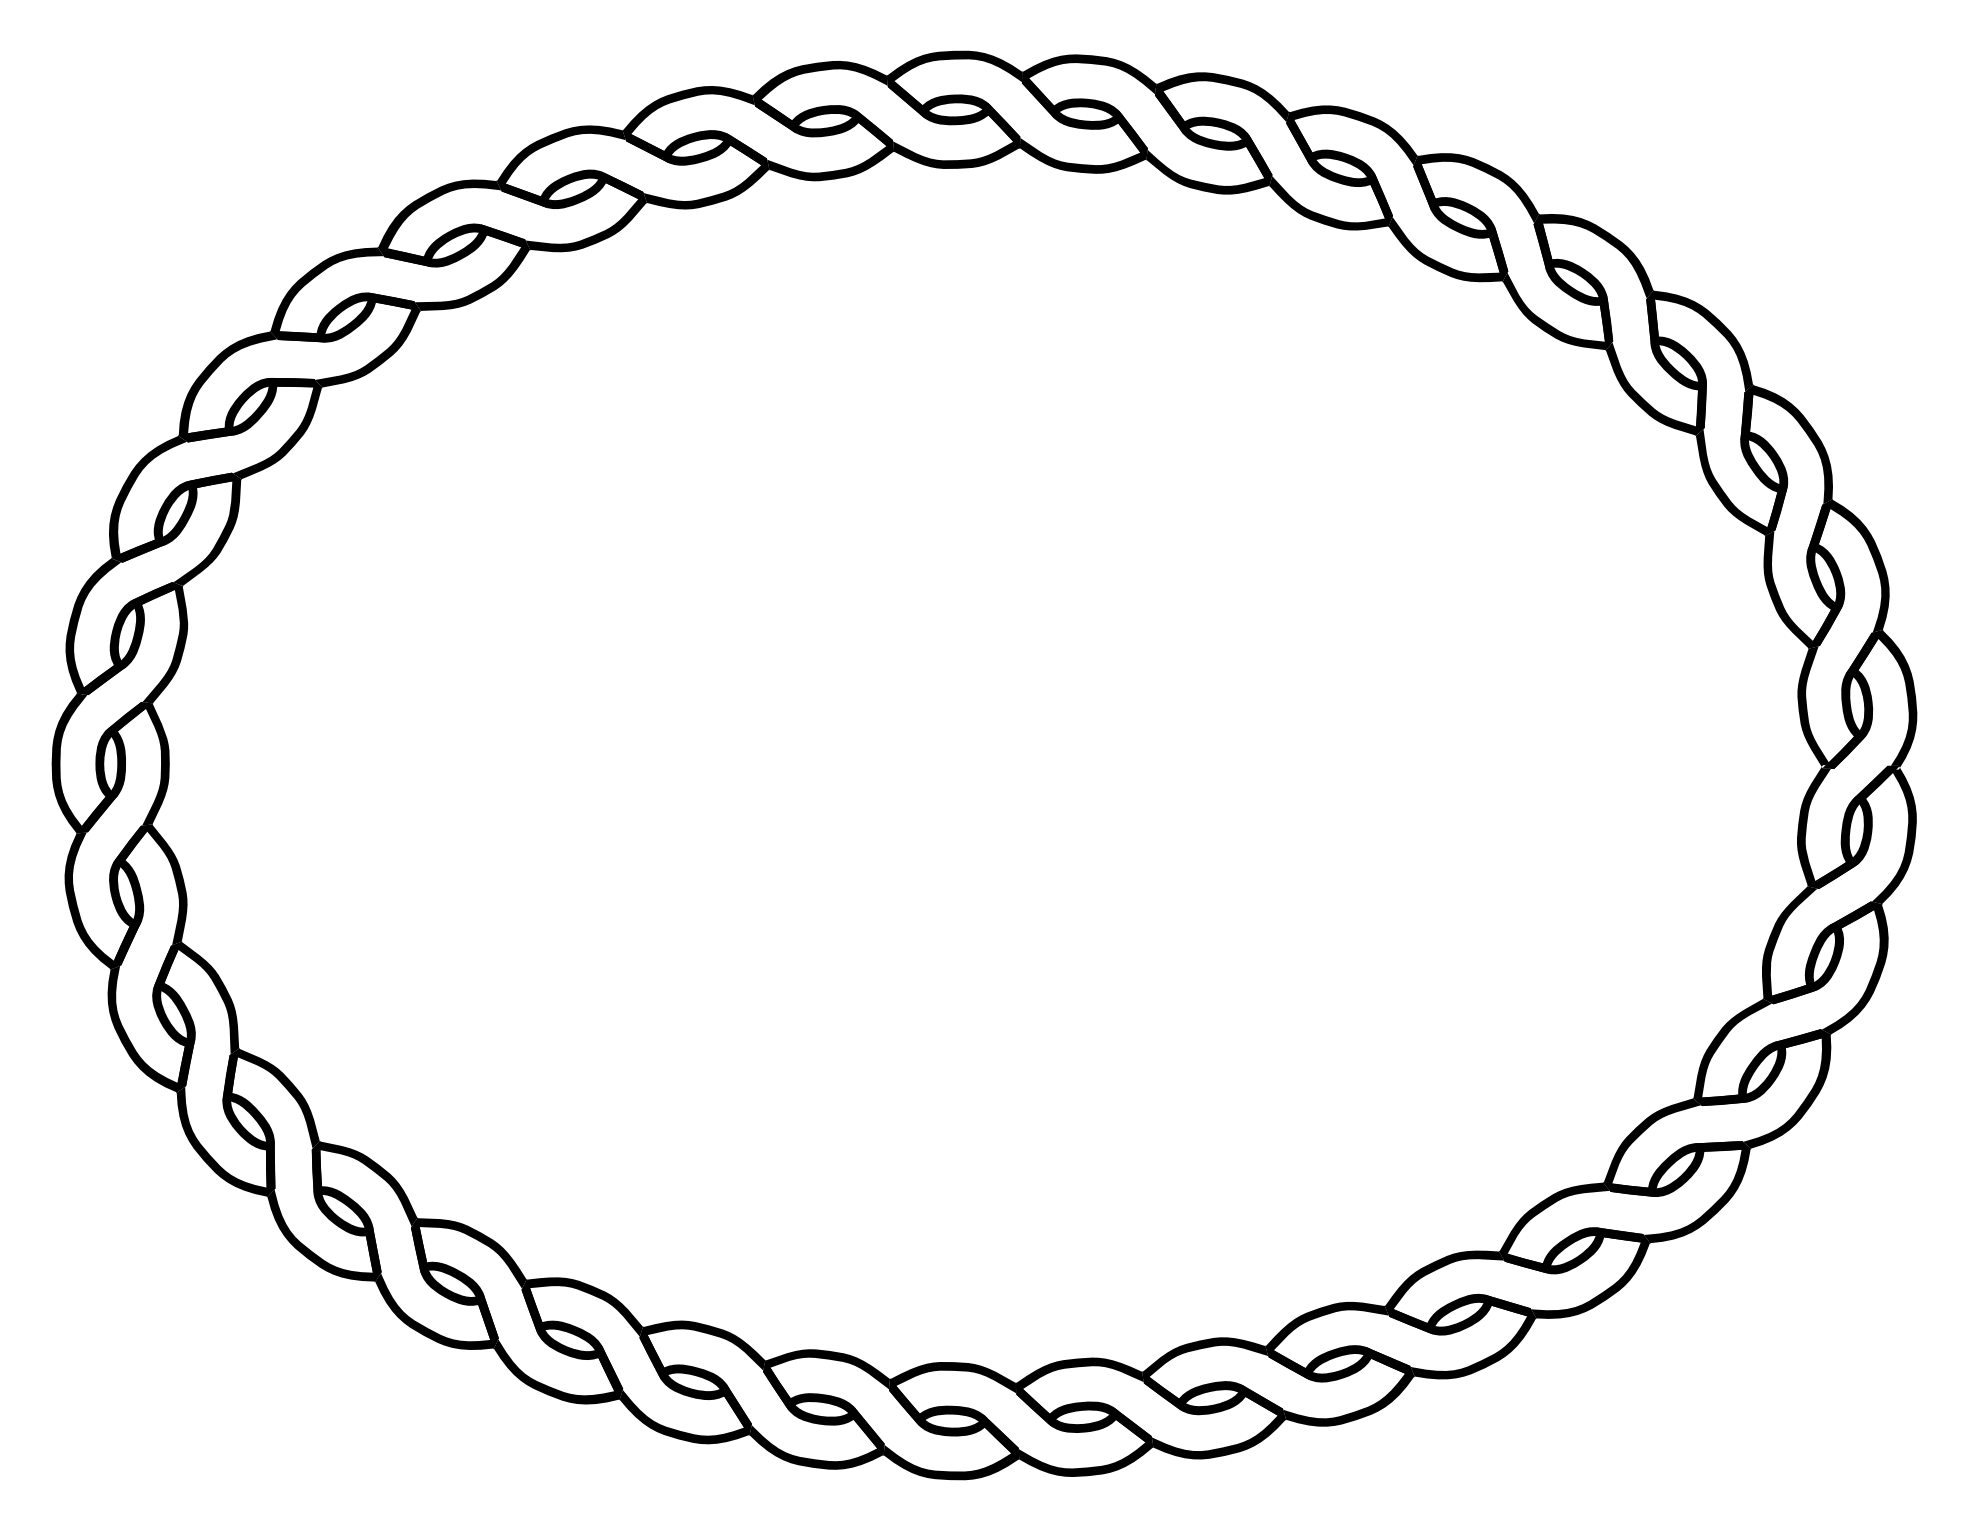 Double Black Line Border Free Cliparts That You Can Download To You